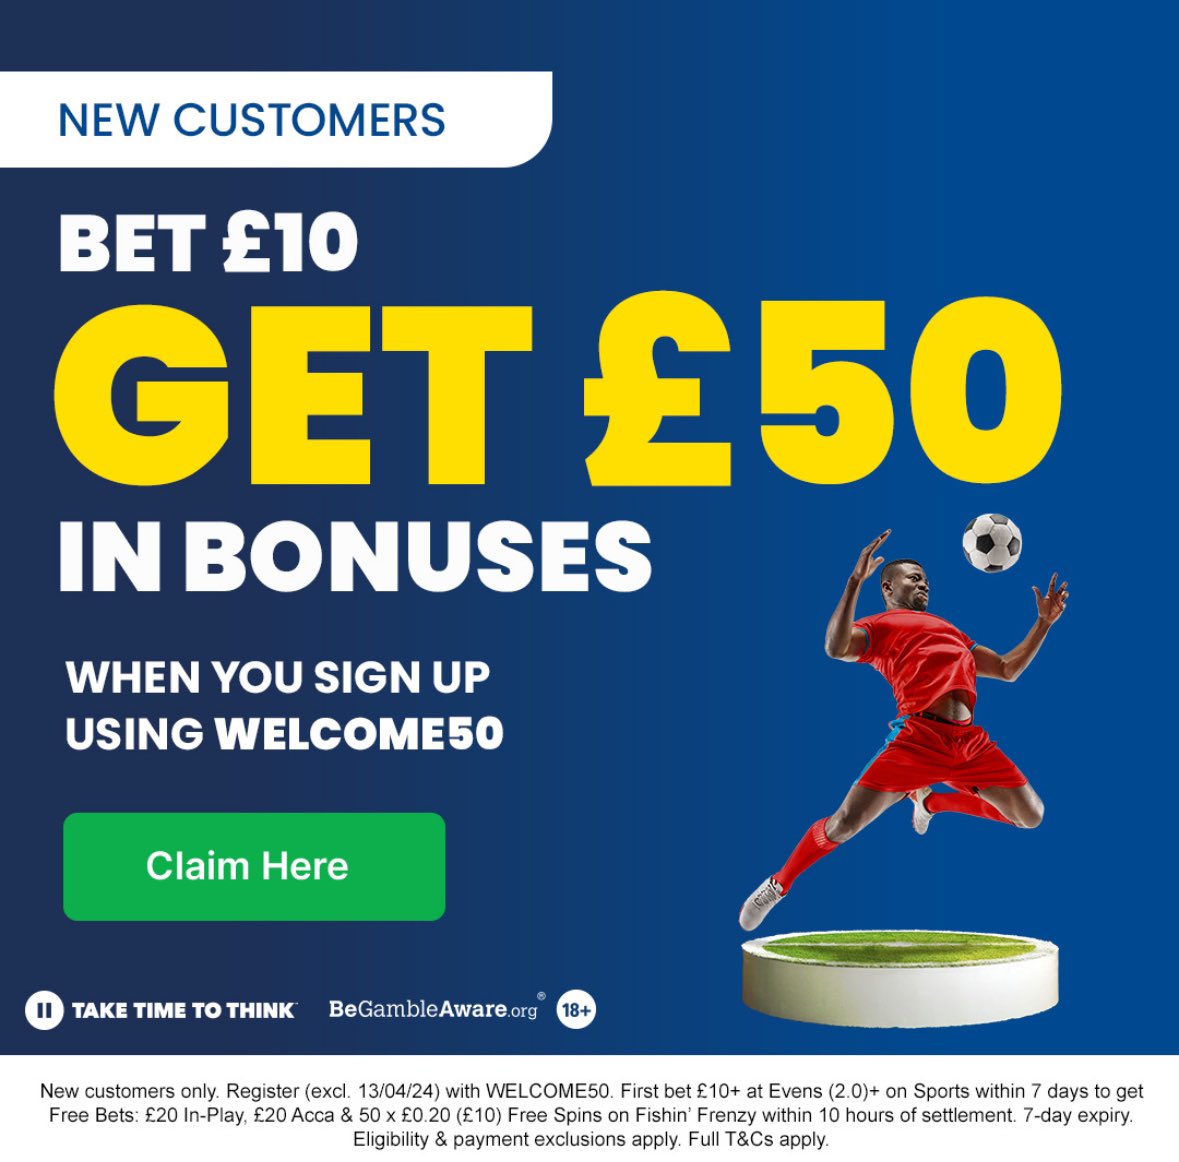 Bet £10 and get £50 in bonuses! Here 👉🏼 bit.ly/3Unr5hU Join Betfred today, bet £10 at evens or above and get £50 bonuses. New customers only. 18+ gambleresponsibly #ad T&Cs apply